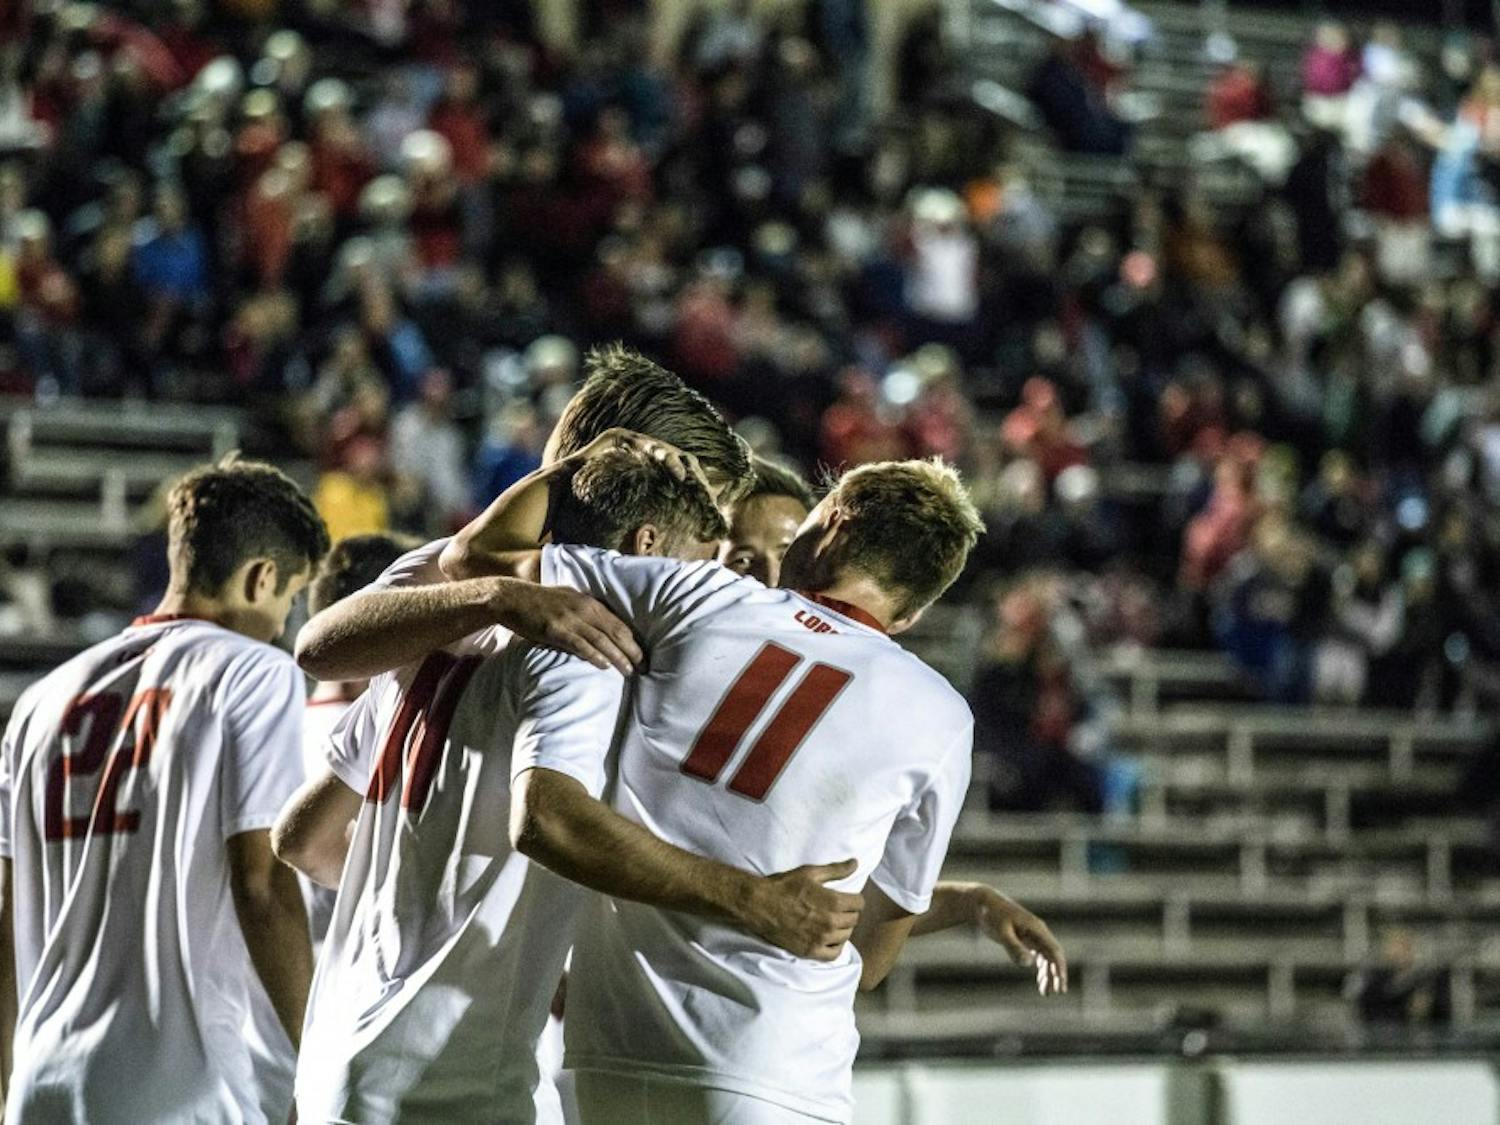 The UNM soccer team celebrates after a goal against University of Alabama Birmingham on Saturday, Oct. 14, 2017. The Lobos defeated UAB 2-0.